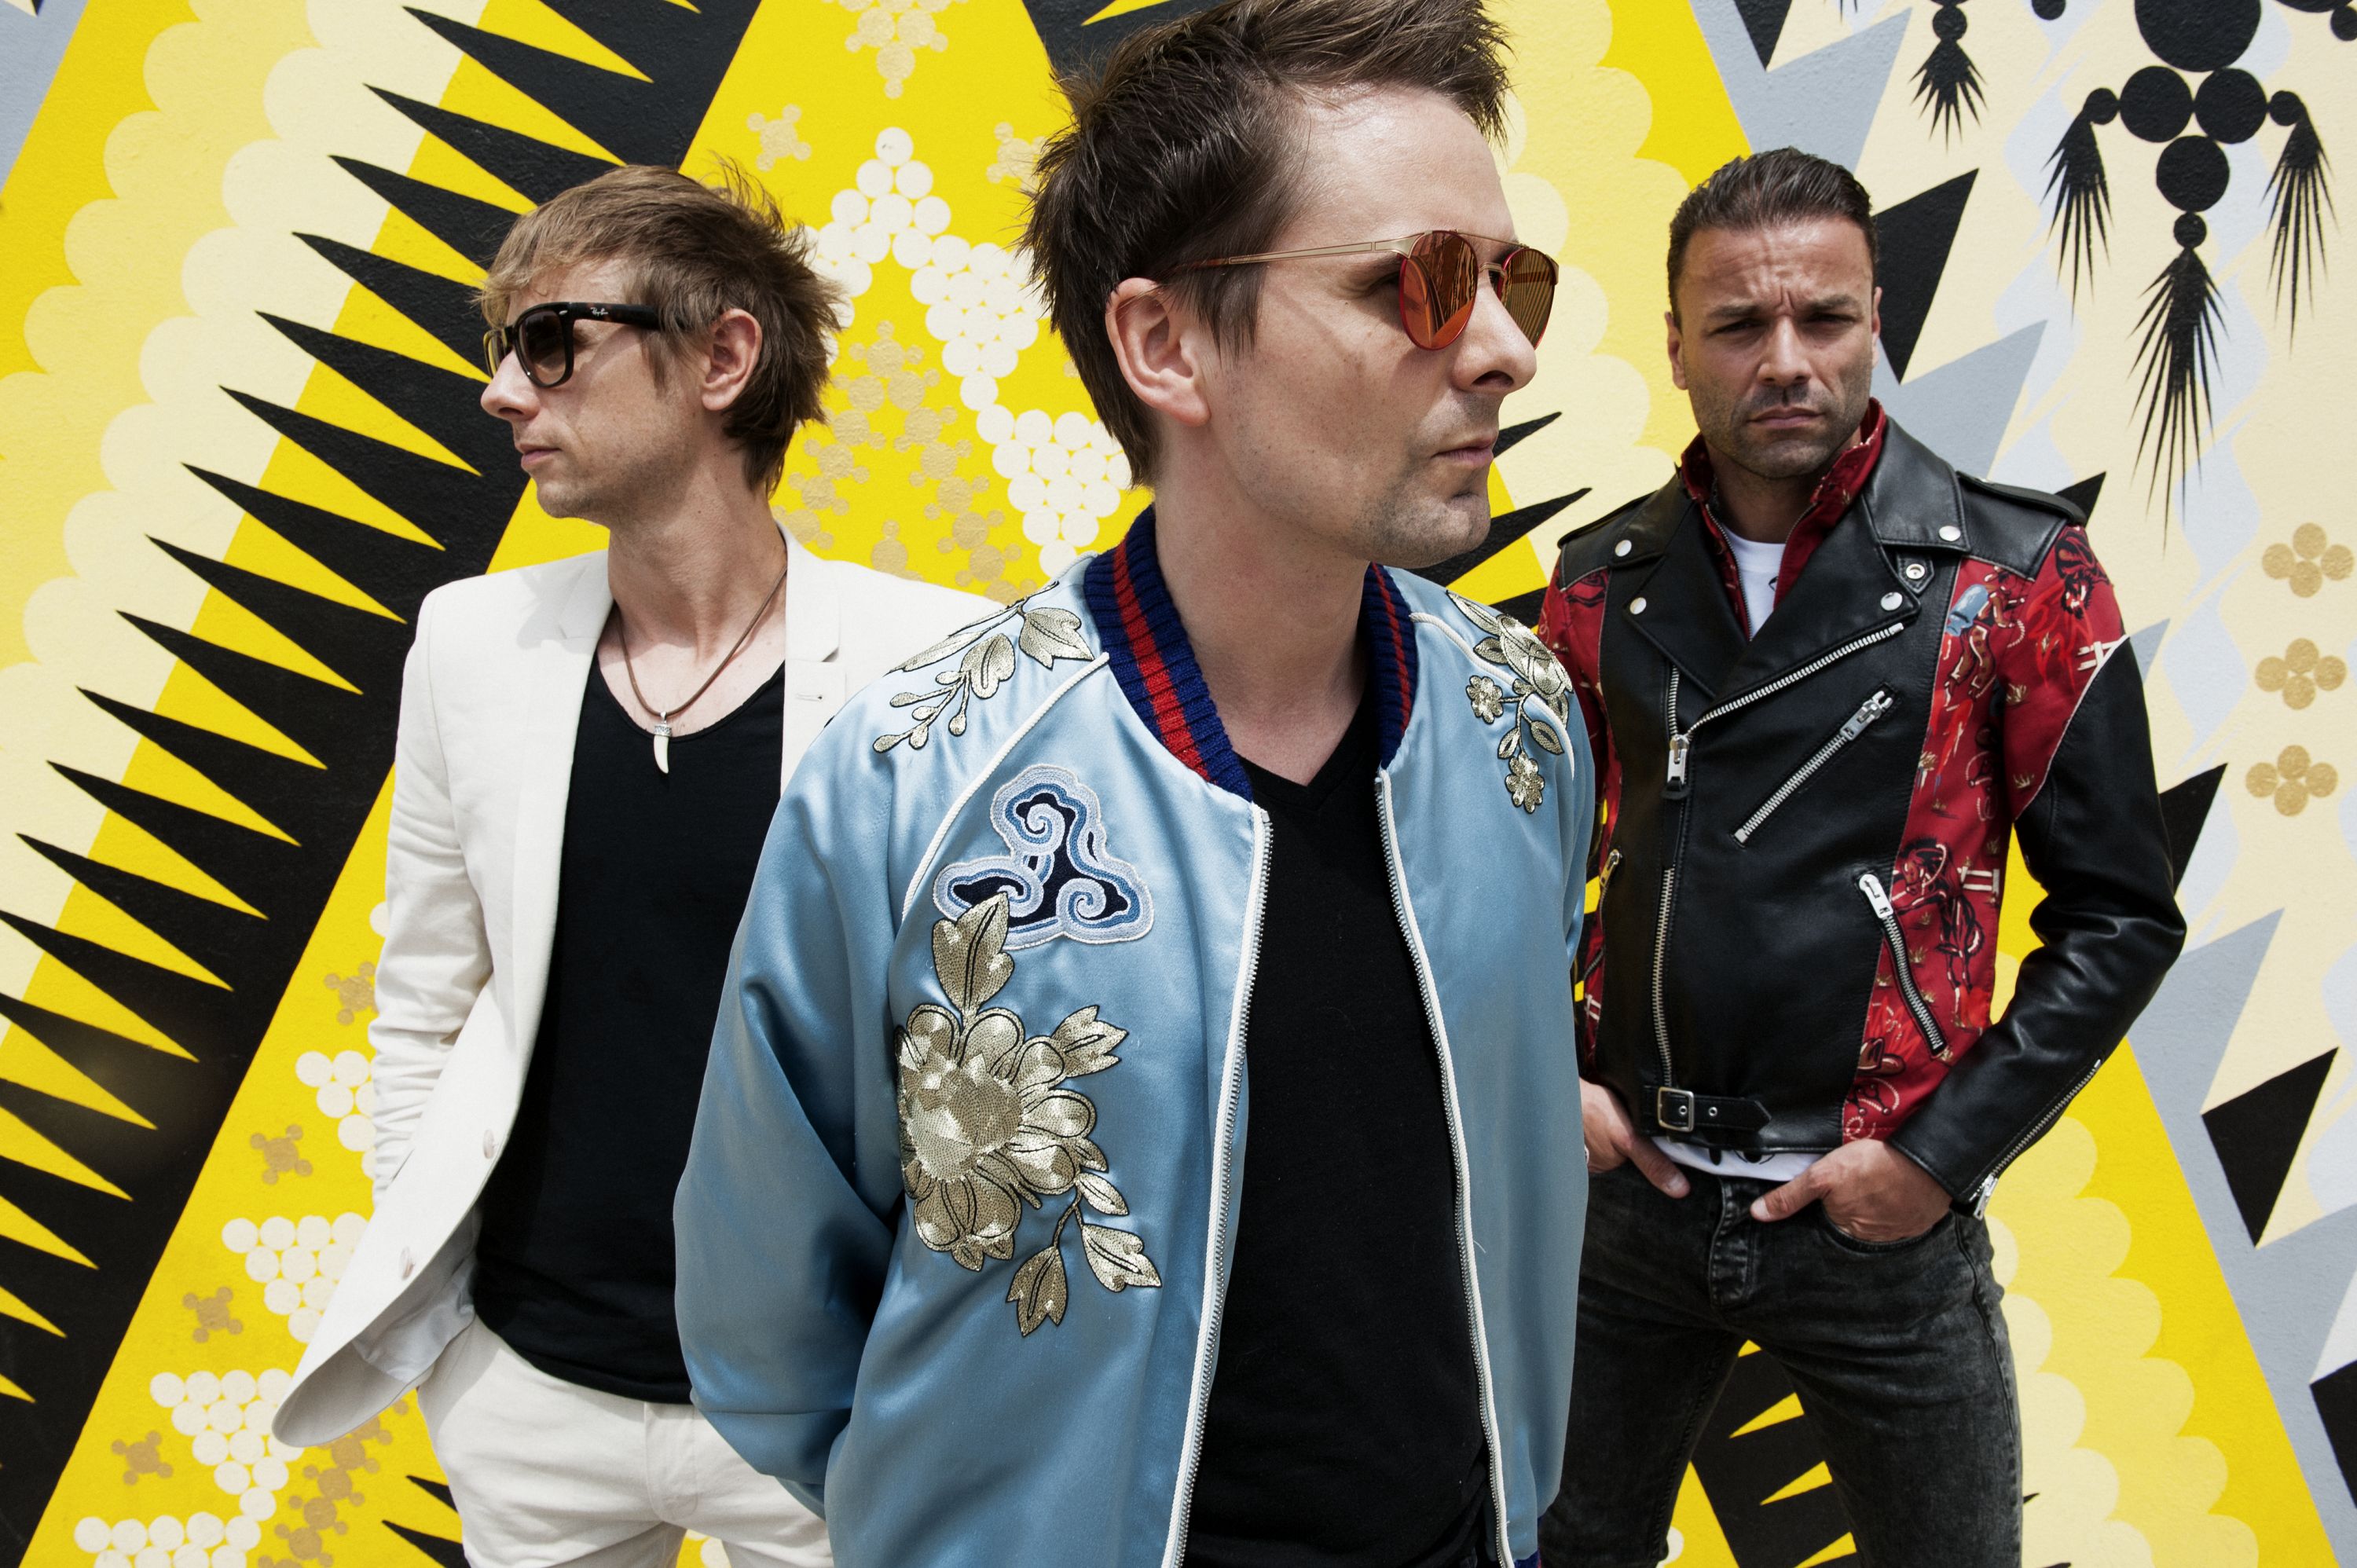 Muse Release Their Brand New Single "Dig Down" - Available Now